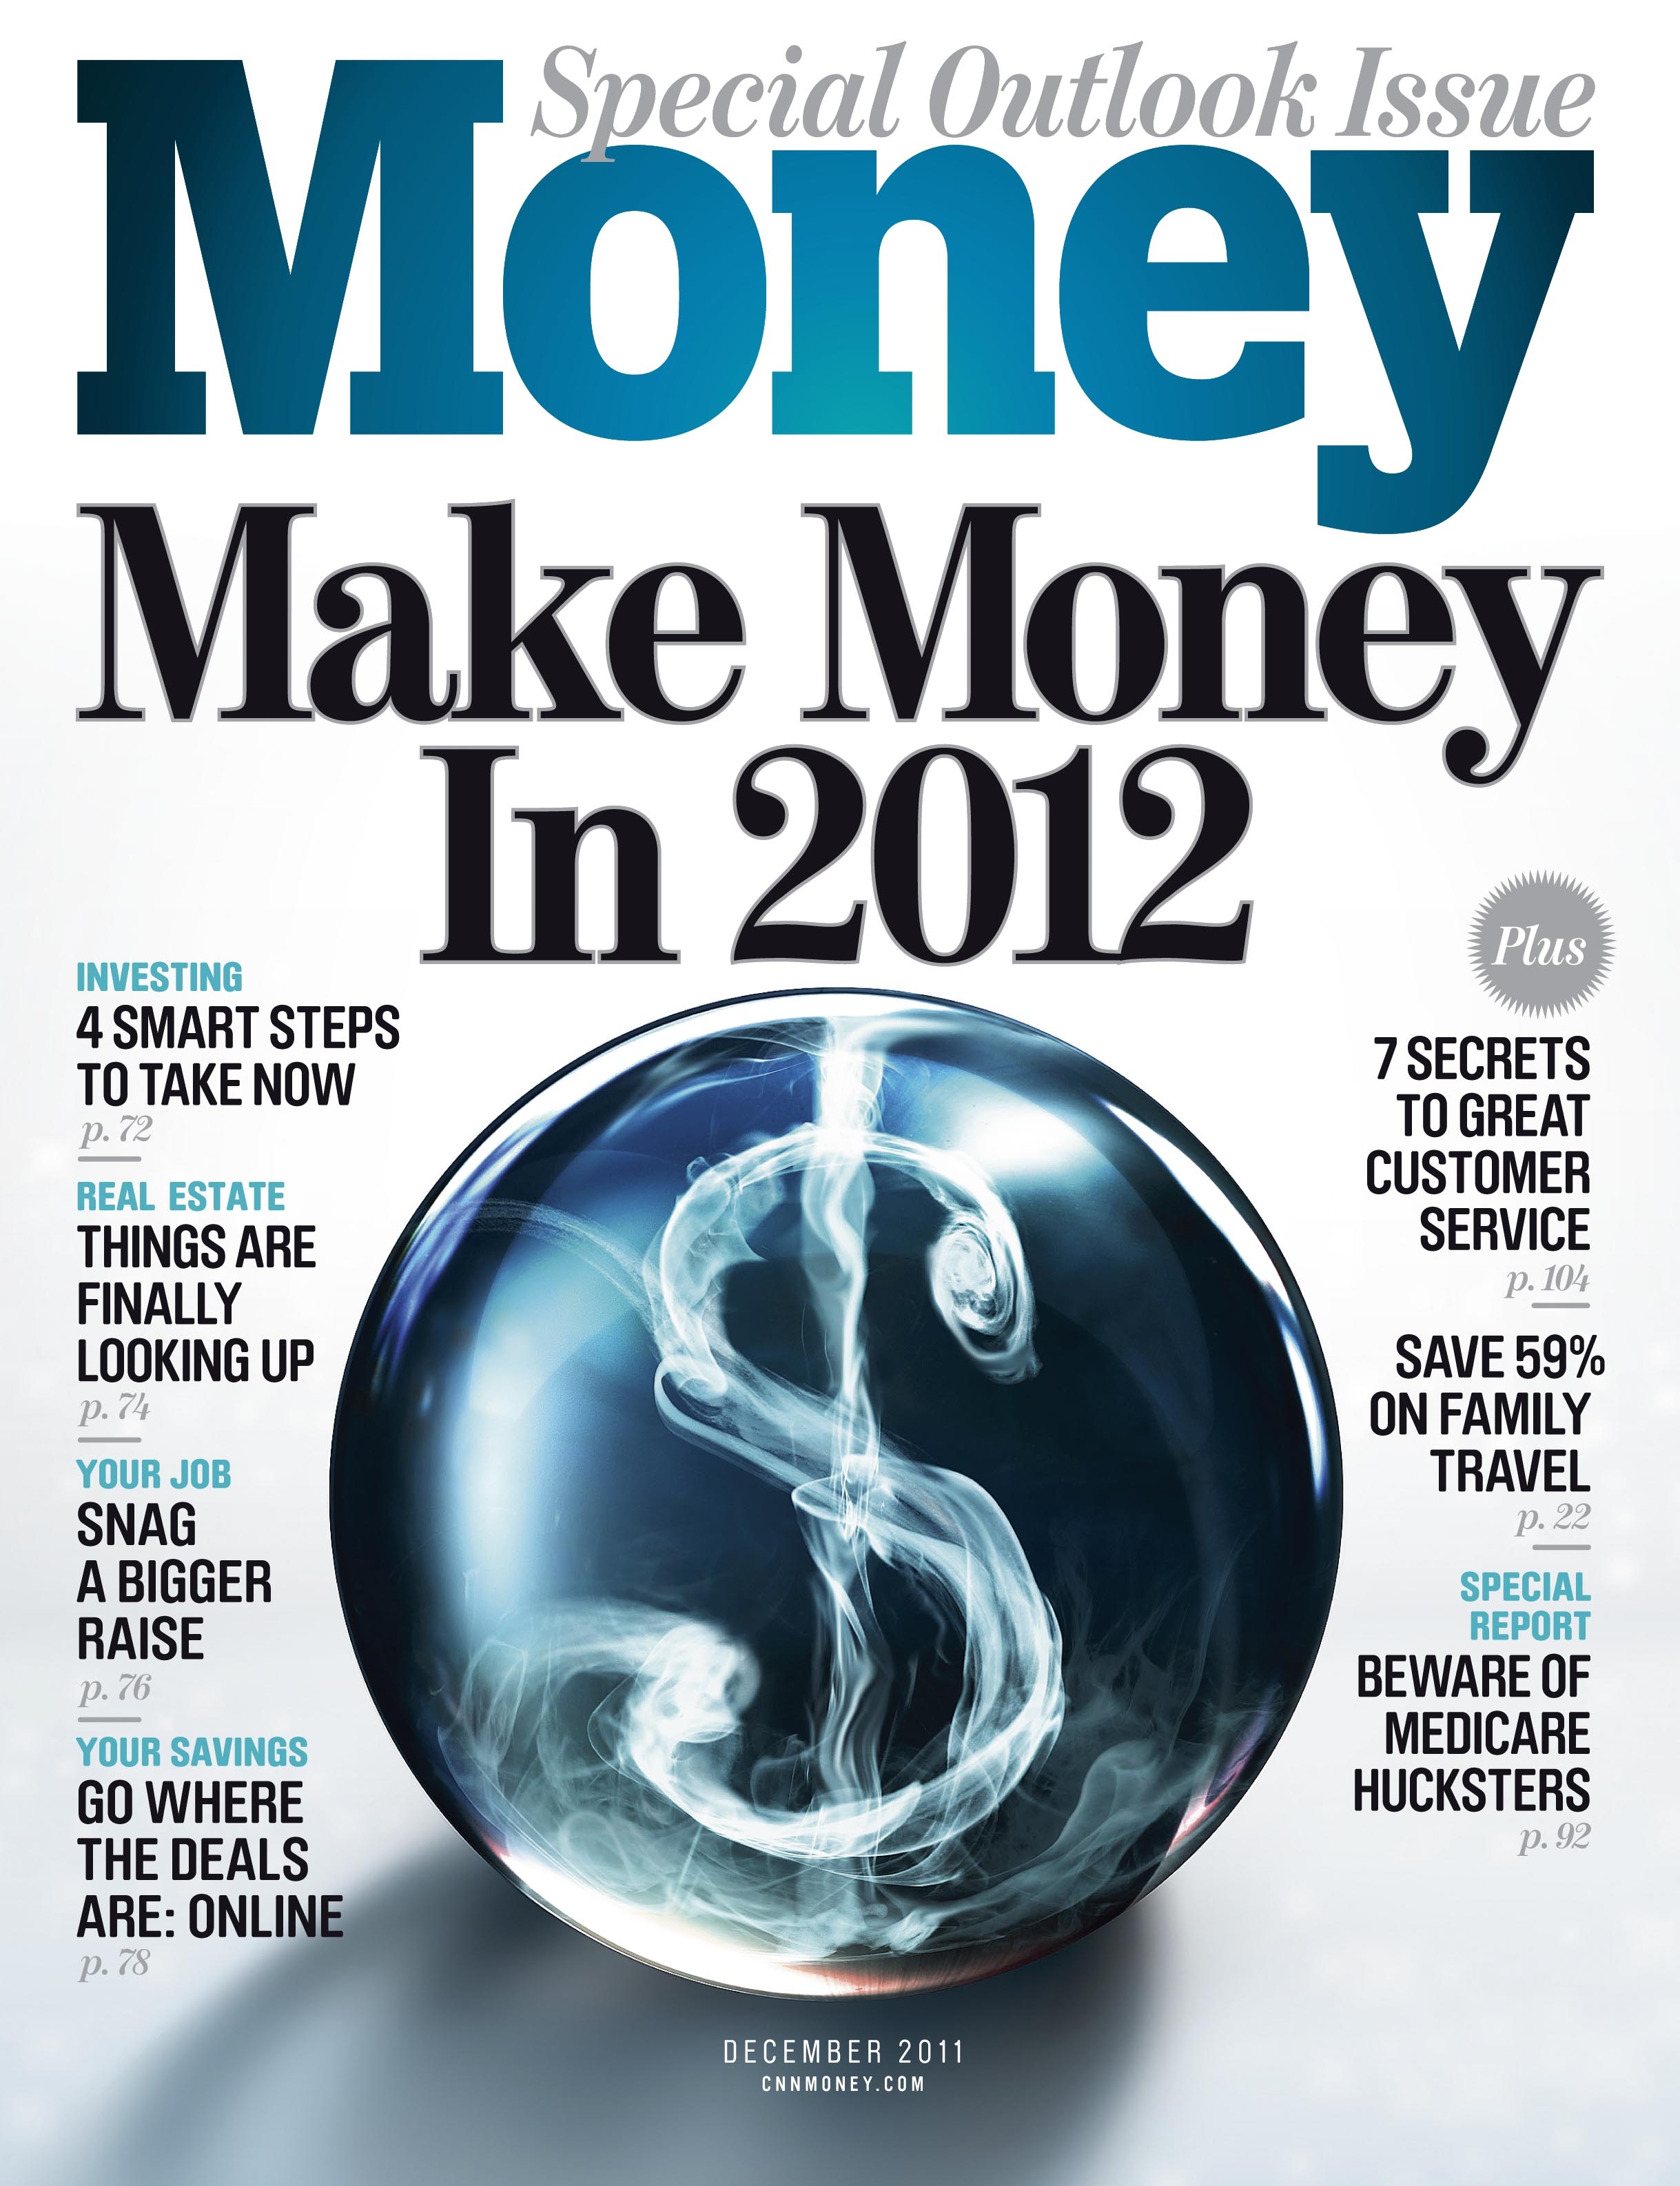 Money Magazine Archives Page 7 Of 14 Talking Biz News - money seeks reporter to cover investing